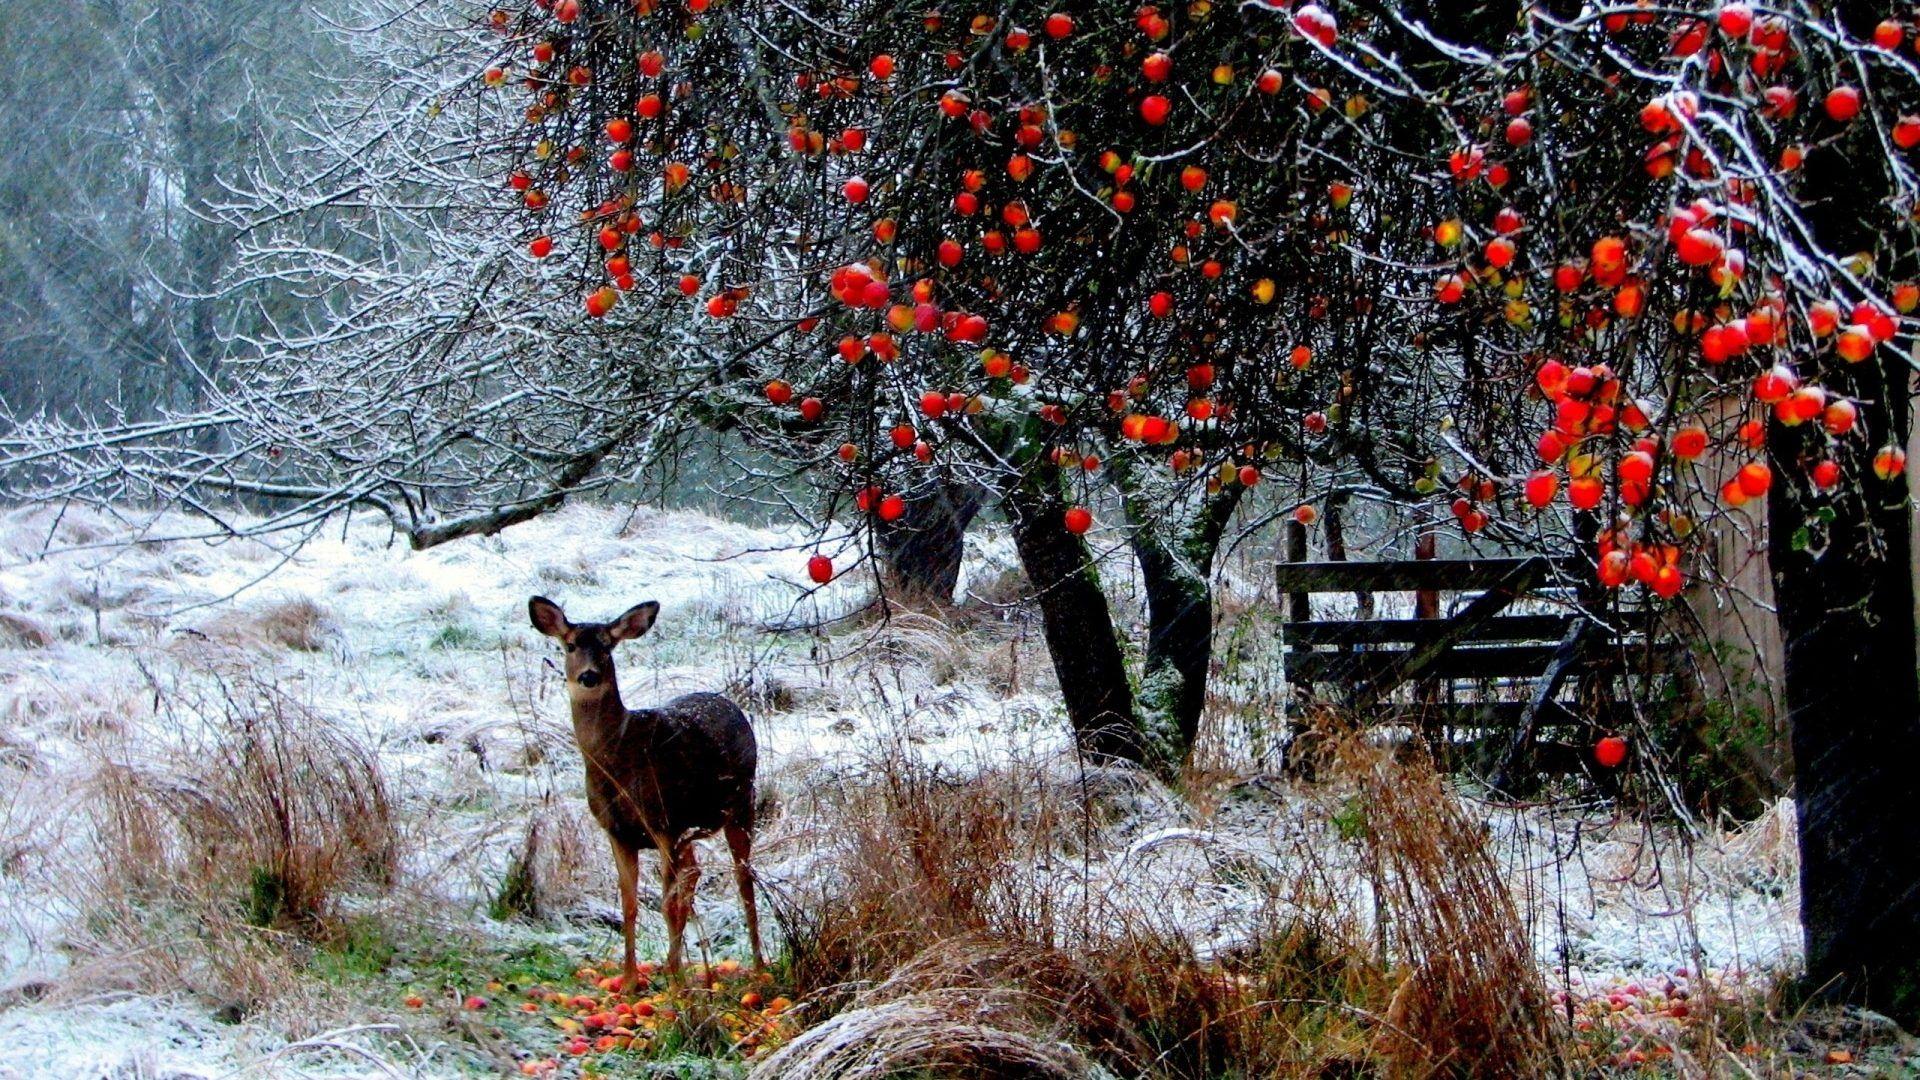 Snowing Tag wallpaper: Trees Seasons Berries Snow Landscapes Nature